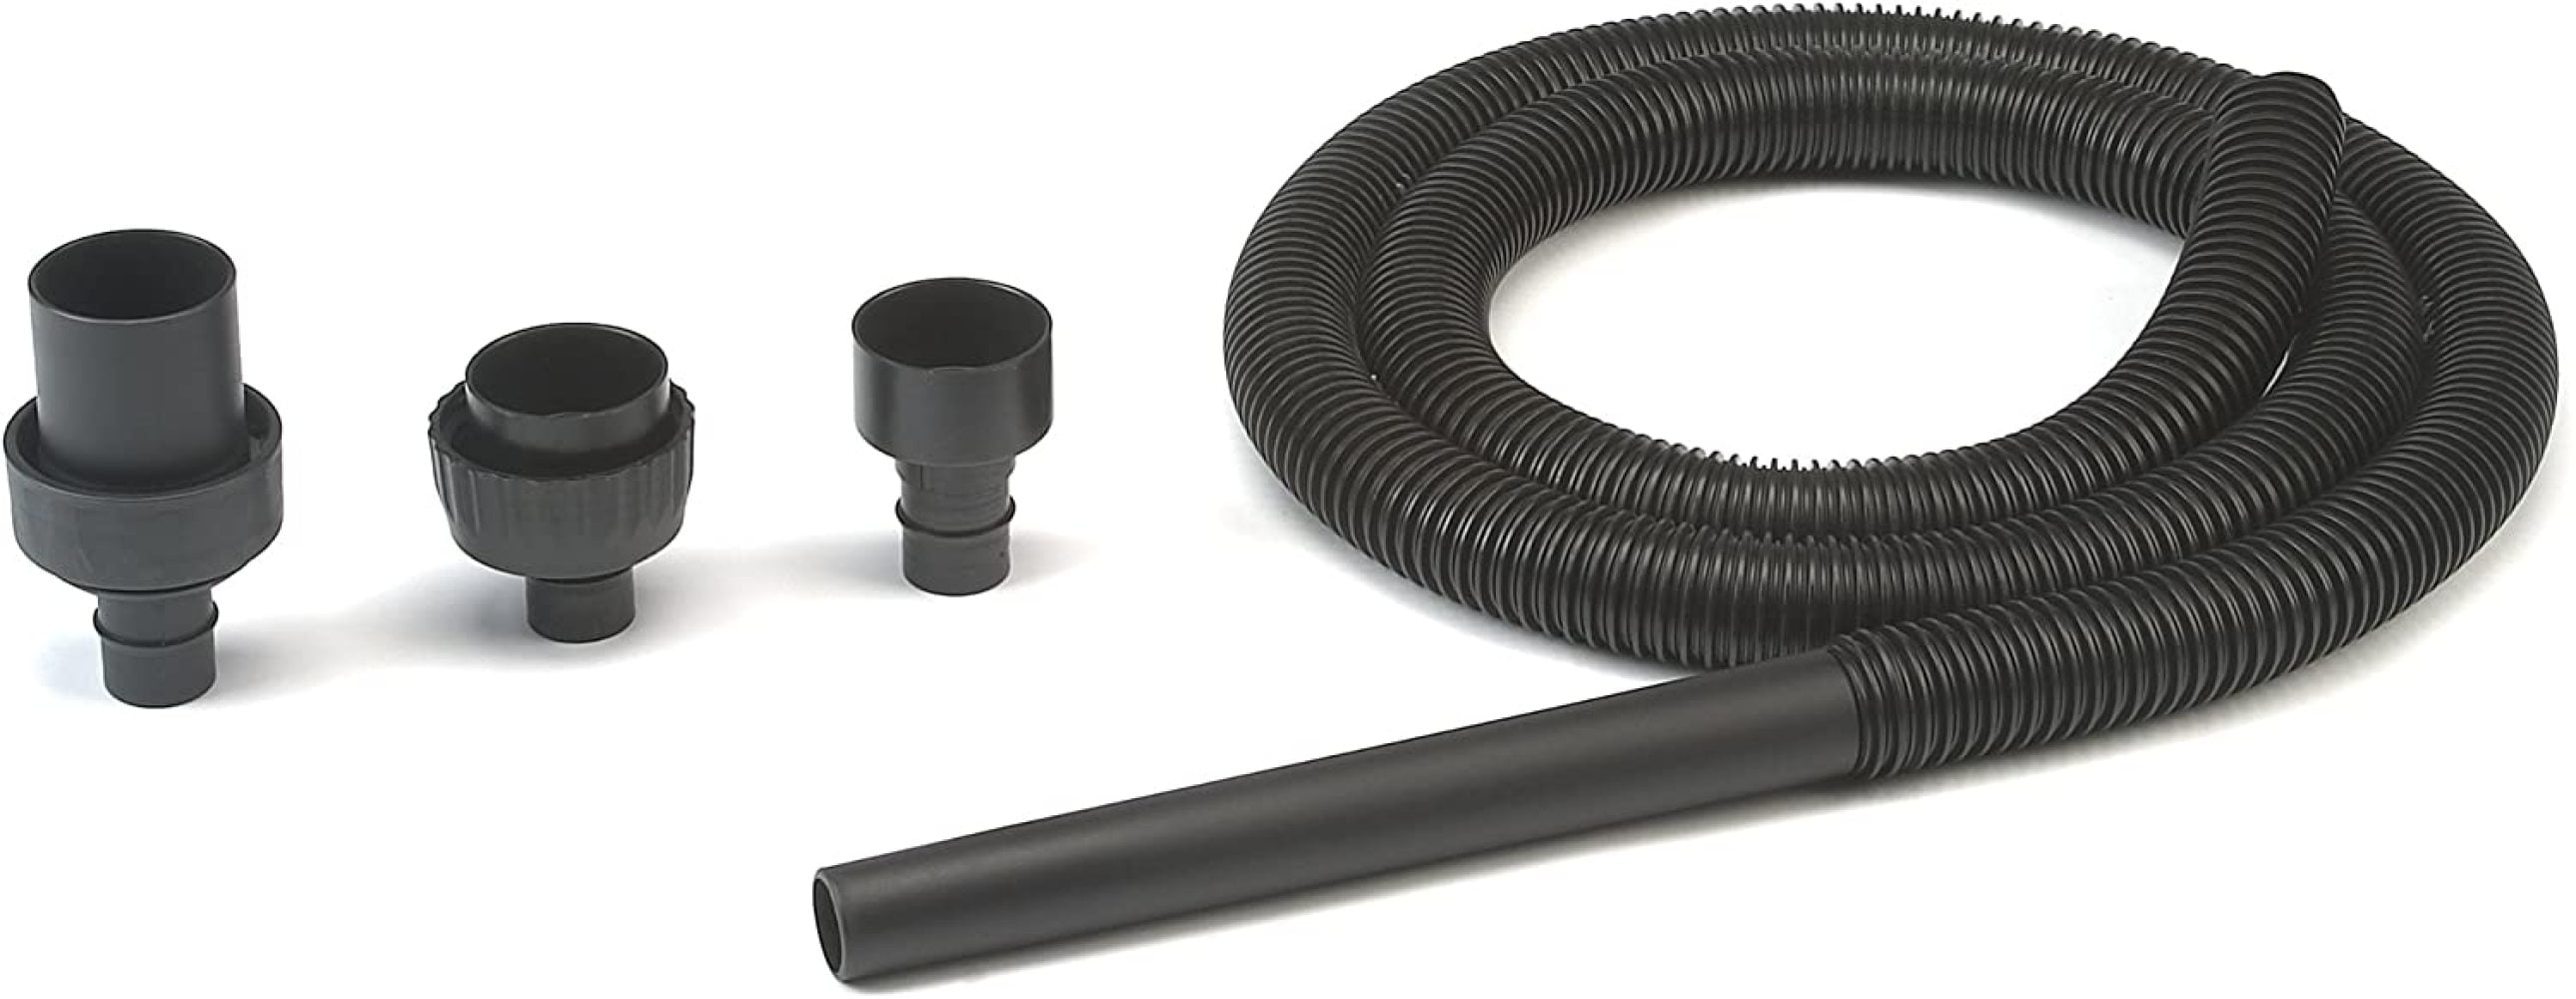 Shop-Vac 8018900 1-1/4-Inch Durable Hose Micro Cleaning Kit 6pc 